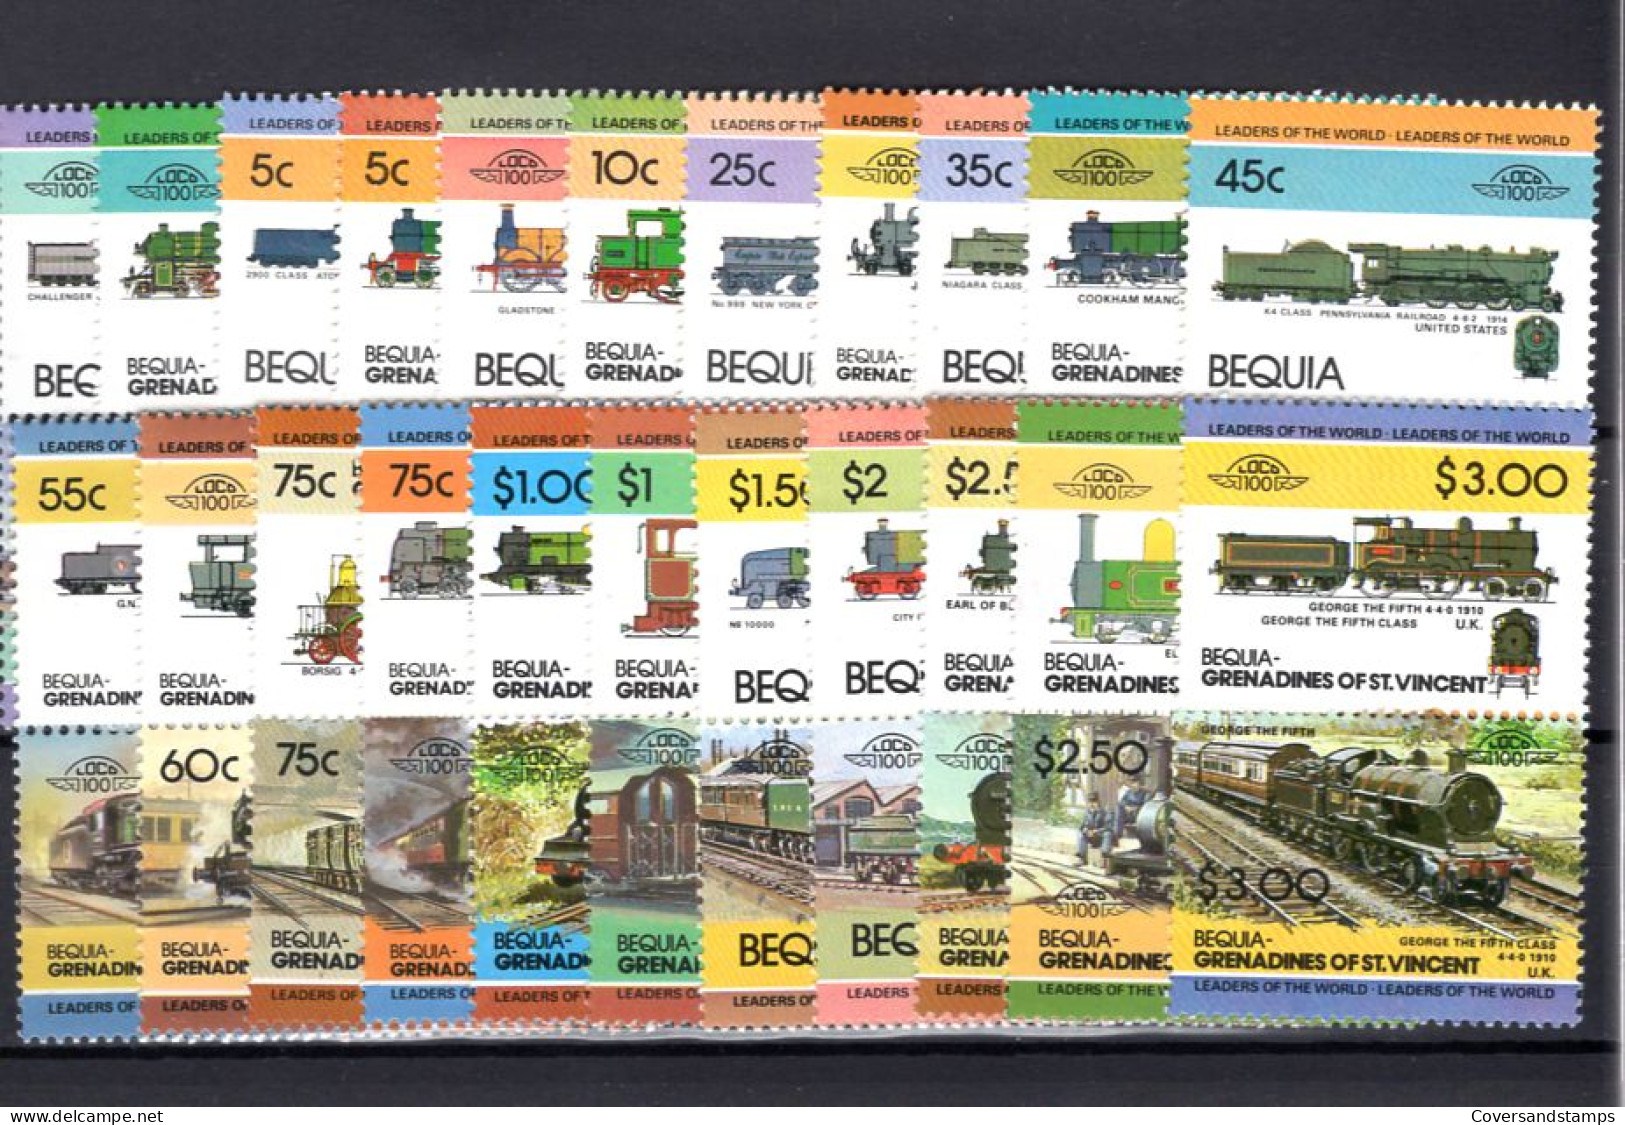  Grenadines Of St. Vincent & Bequia- Trains -  MNH - Trenes